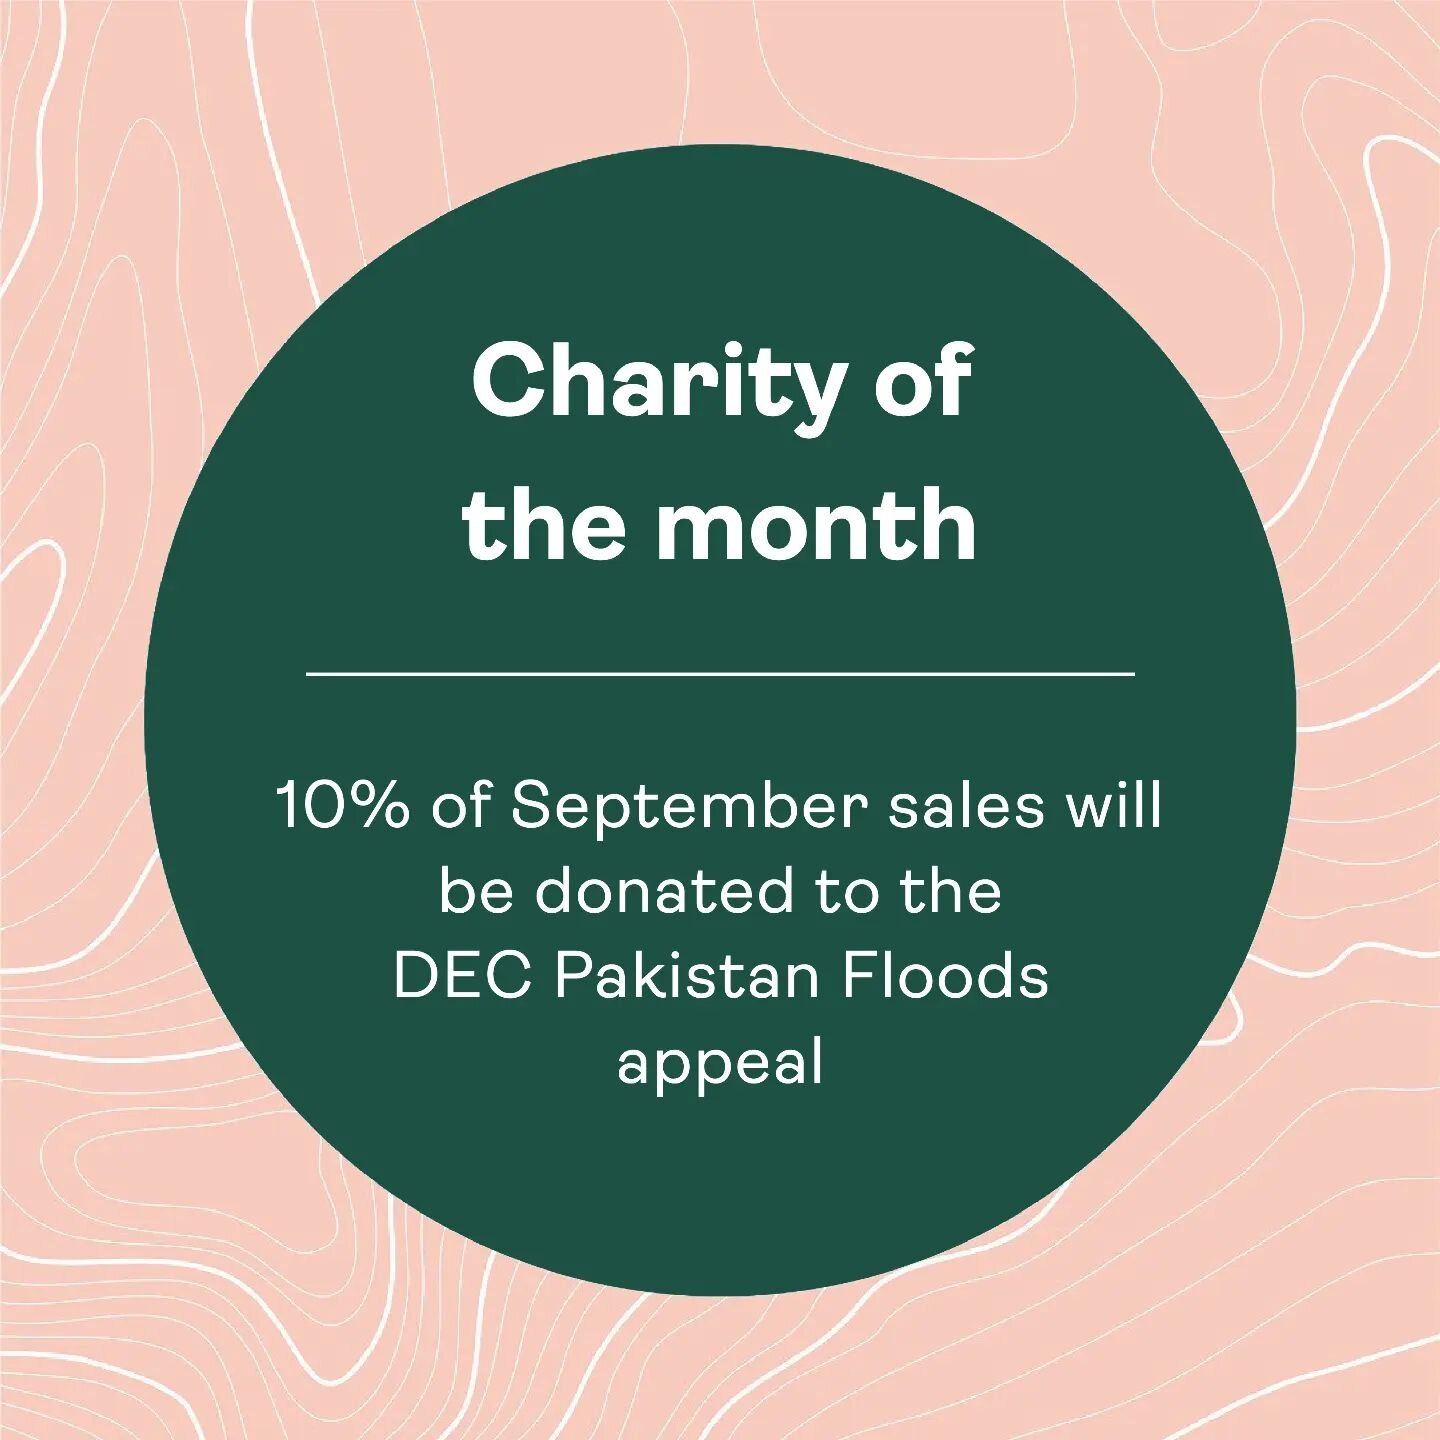 10% of September sales will go to DEC's Pakistan Floods appeal